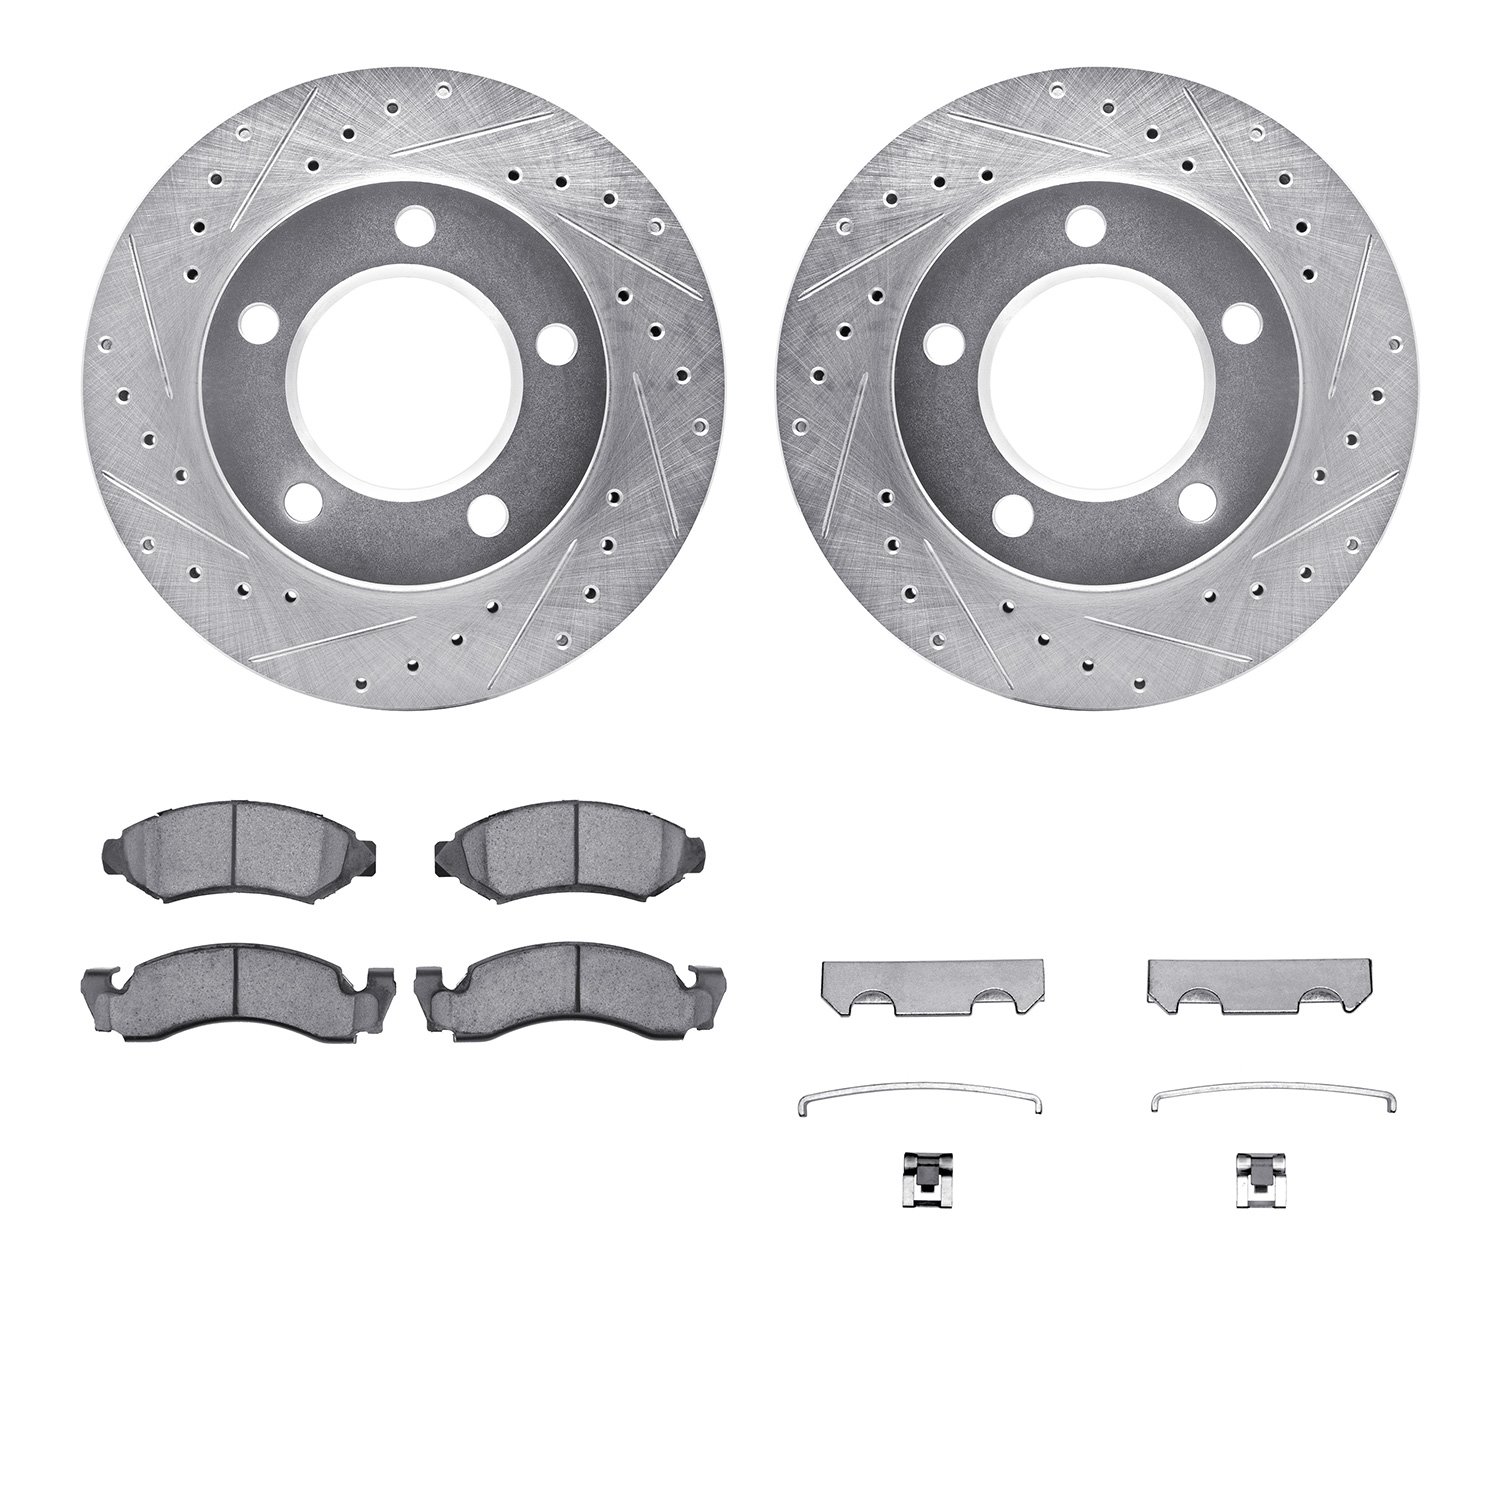 7412-42020 Drilled/Slotted Brake Rotors with Ultimate-Duty Brake Pads Kit & Hardware [Silver], 1974-1980 Multiple Makes/Models,